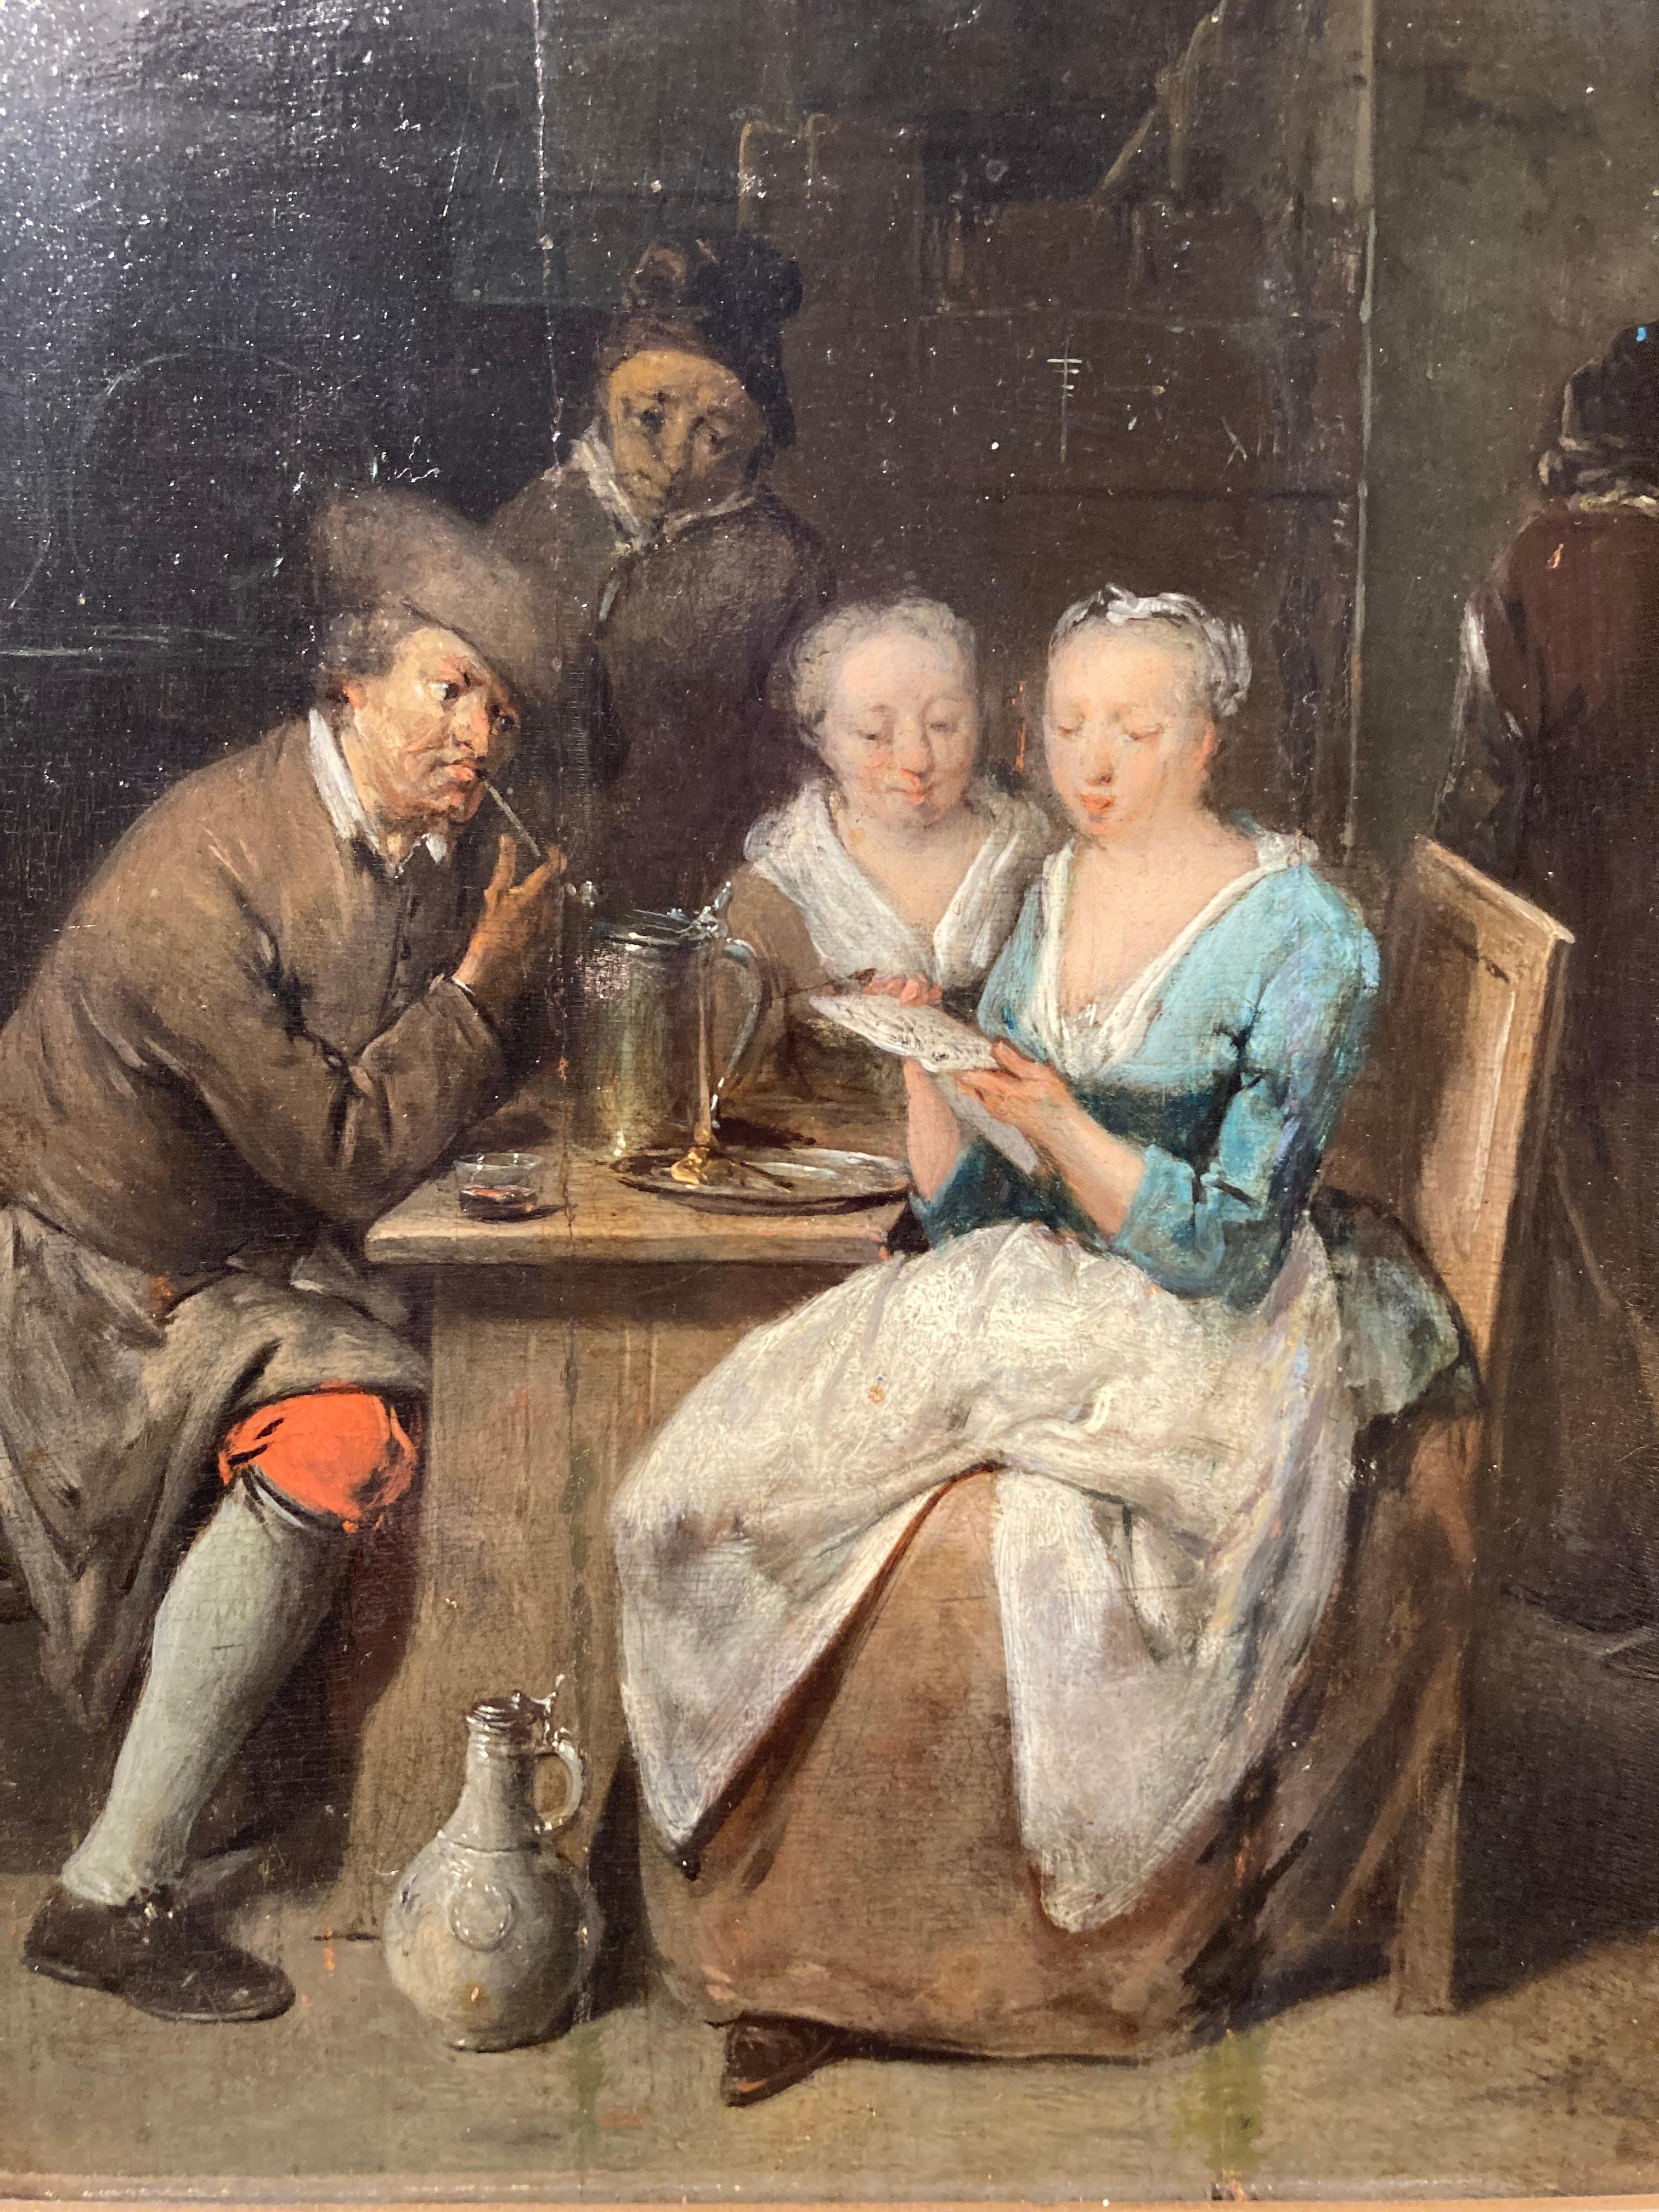 Dutch School, Elegant Couple, Tavern Interior Scene, Cabinet Piece, A PAIR - Painting by Unknown